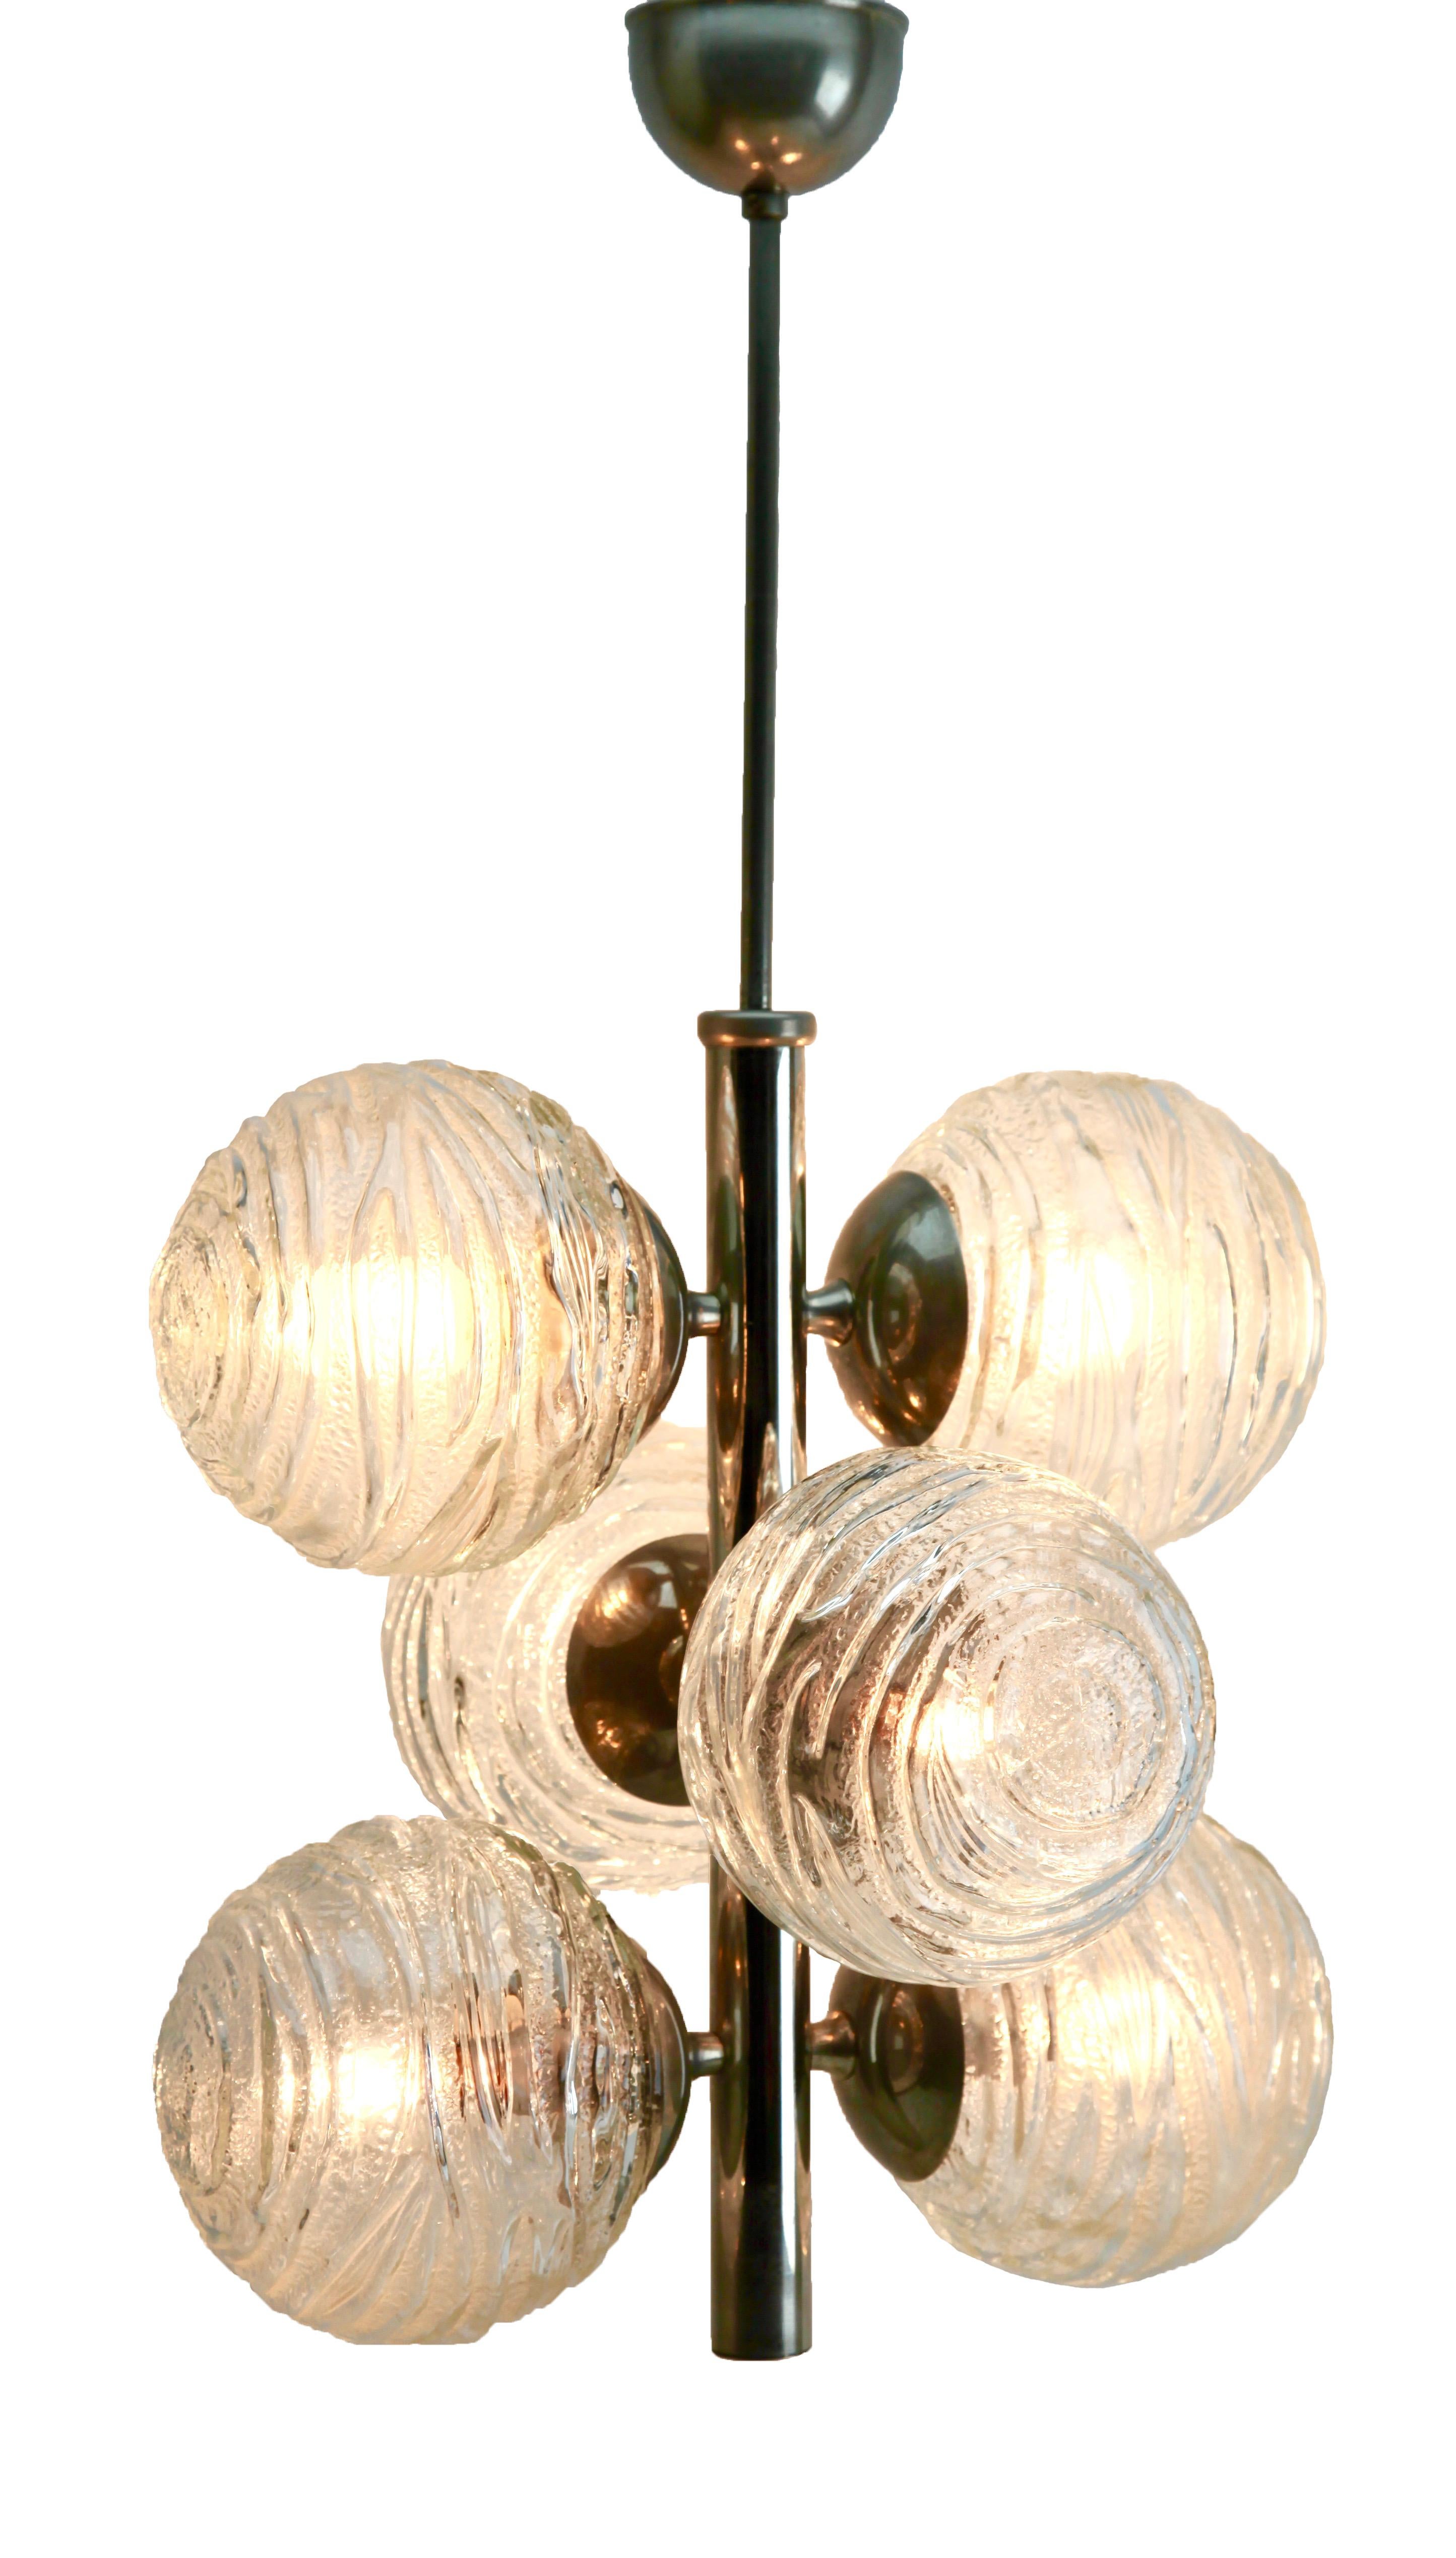 Fischer Leuchten ‘Germany’ Swirl Ball Pendant Stem Lamp with 6 Globular Lights In Good Condition For Sale In Verviers, BE